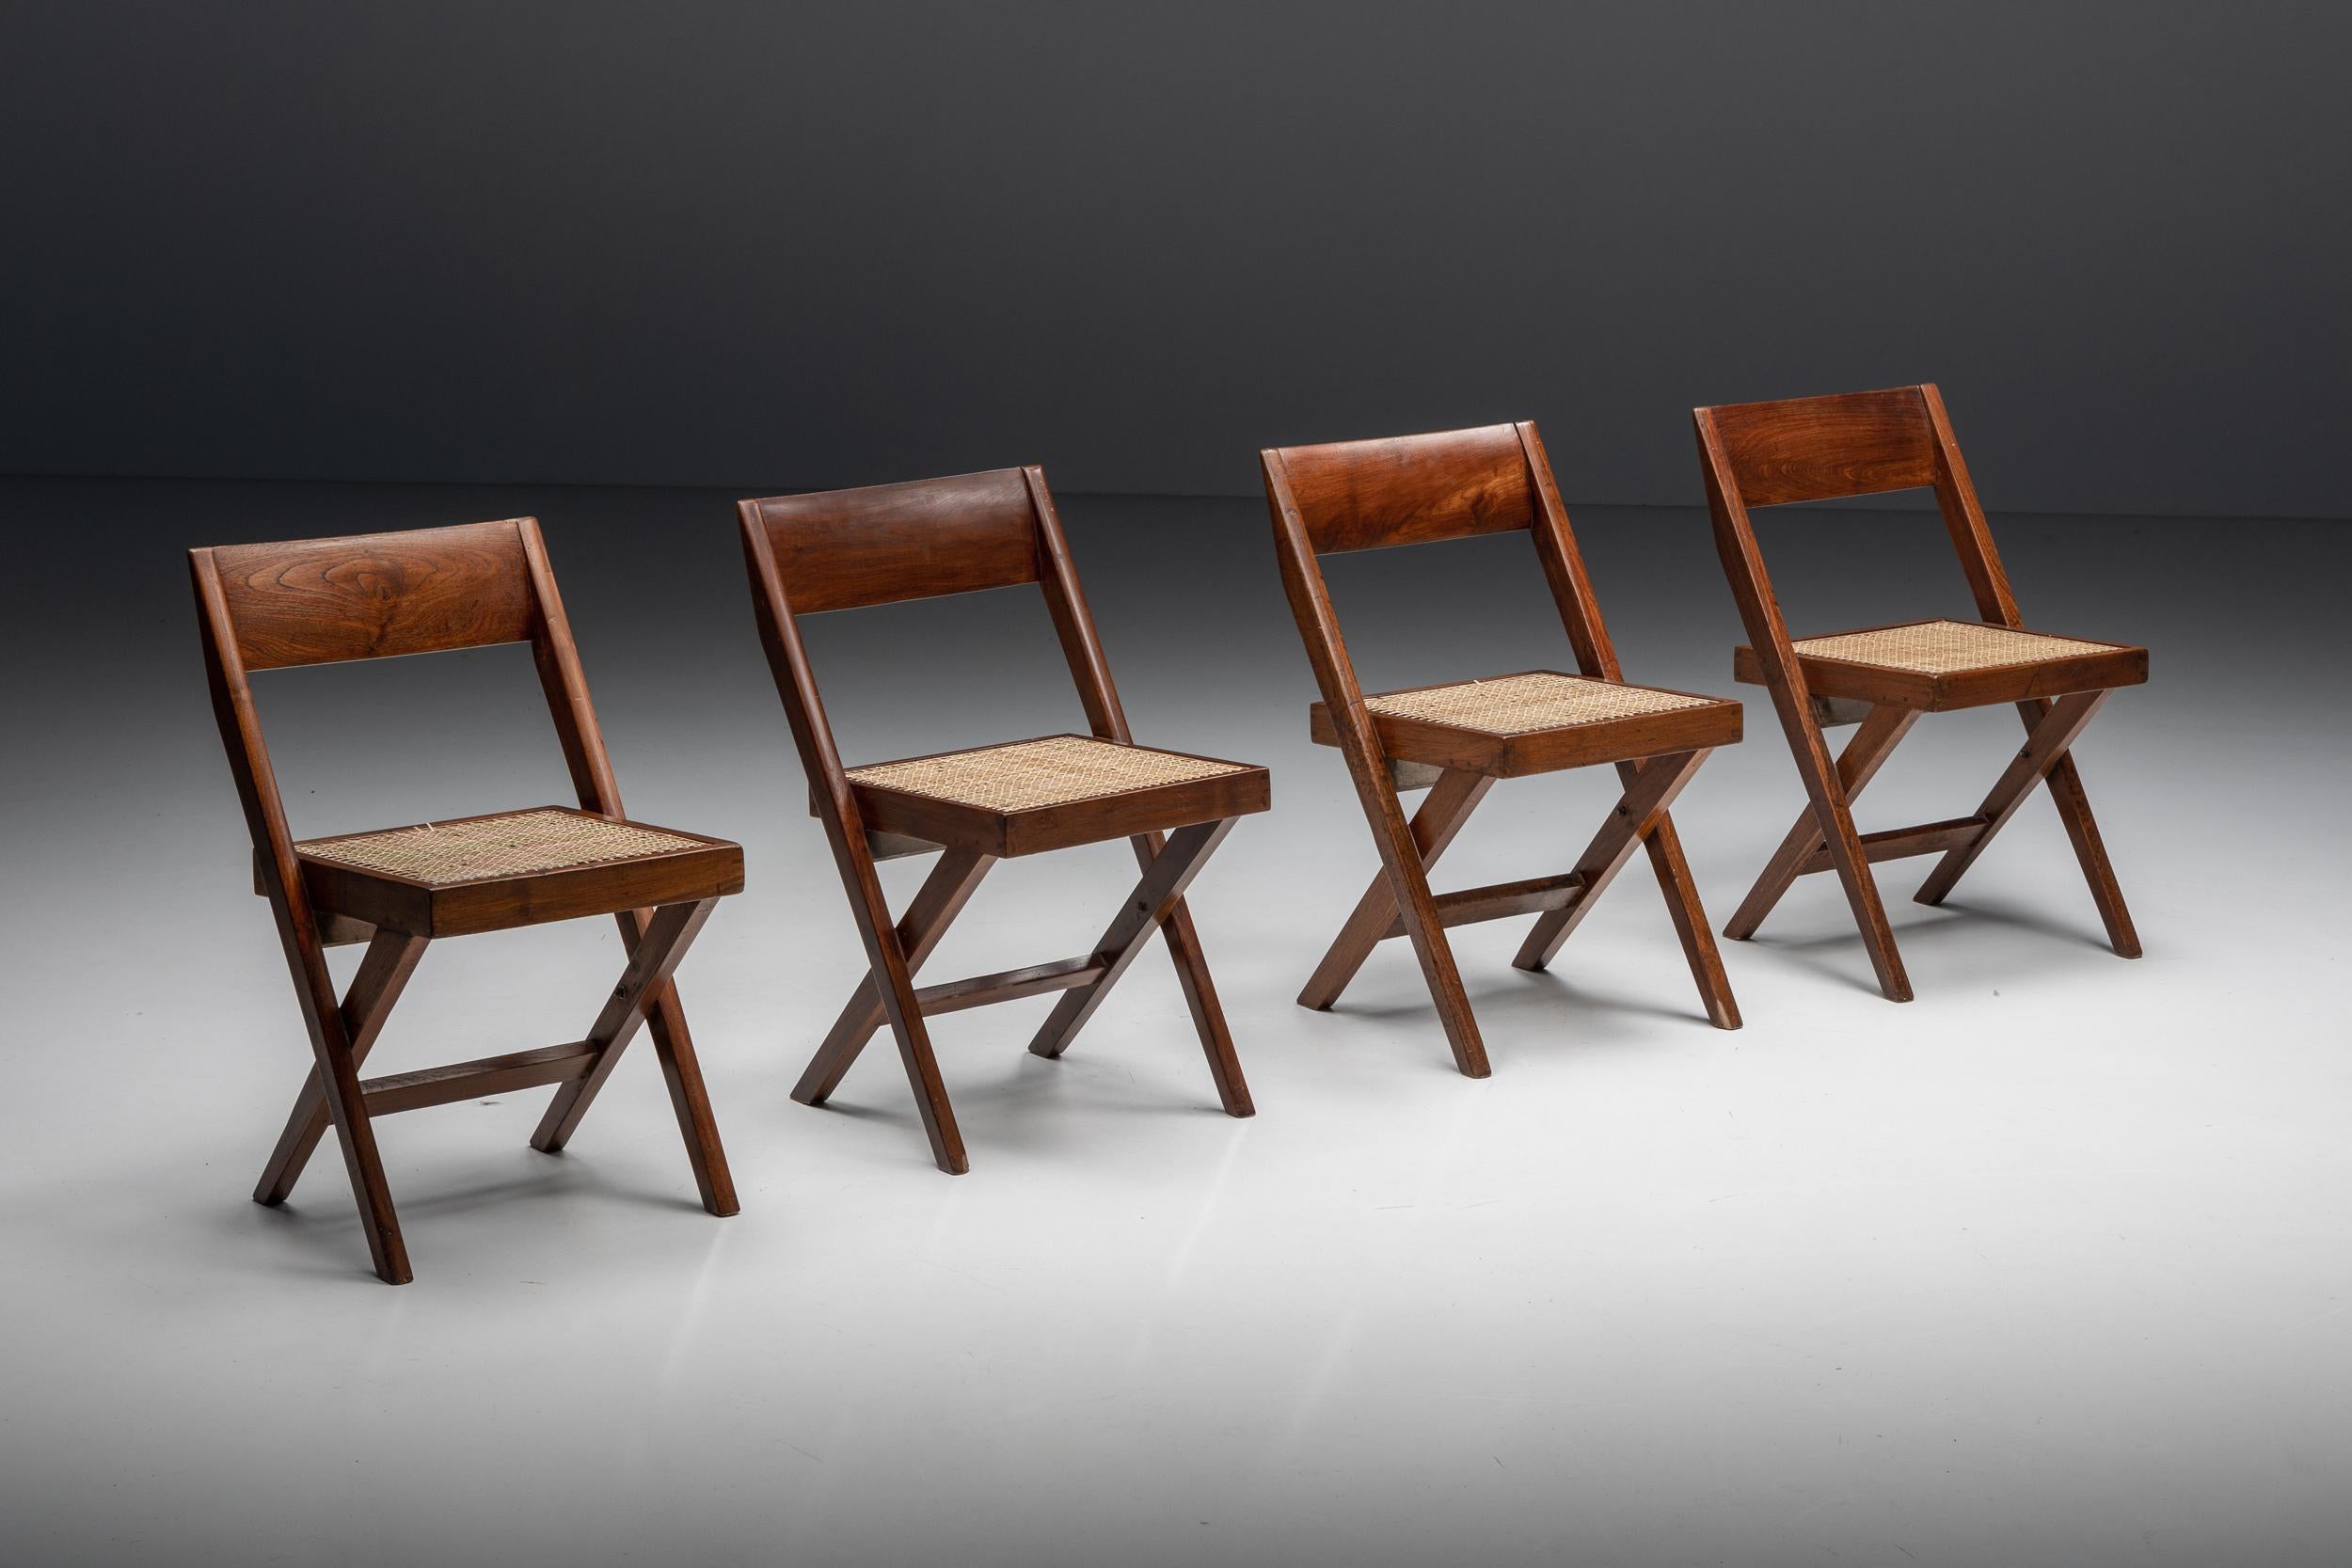 Indian Library Chair by Pierre Jeanneret, 1950's, Chandigarh, Dining chairs, Set of Four